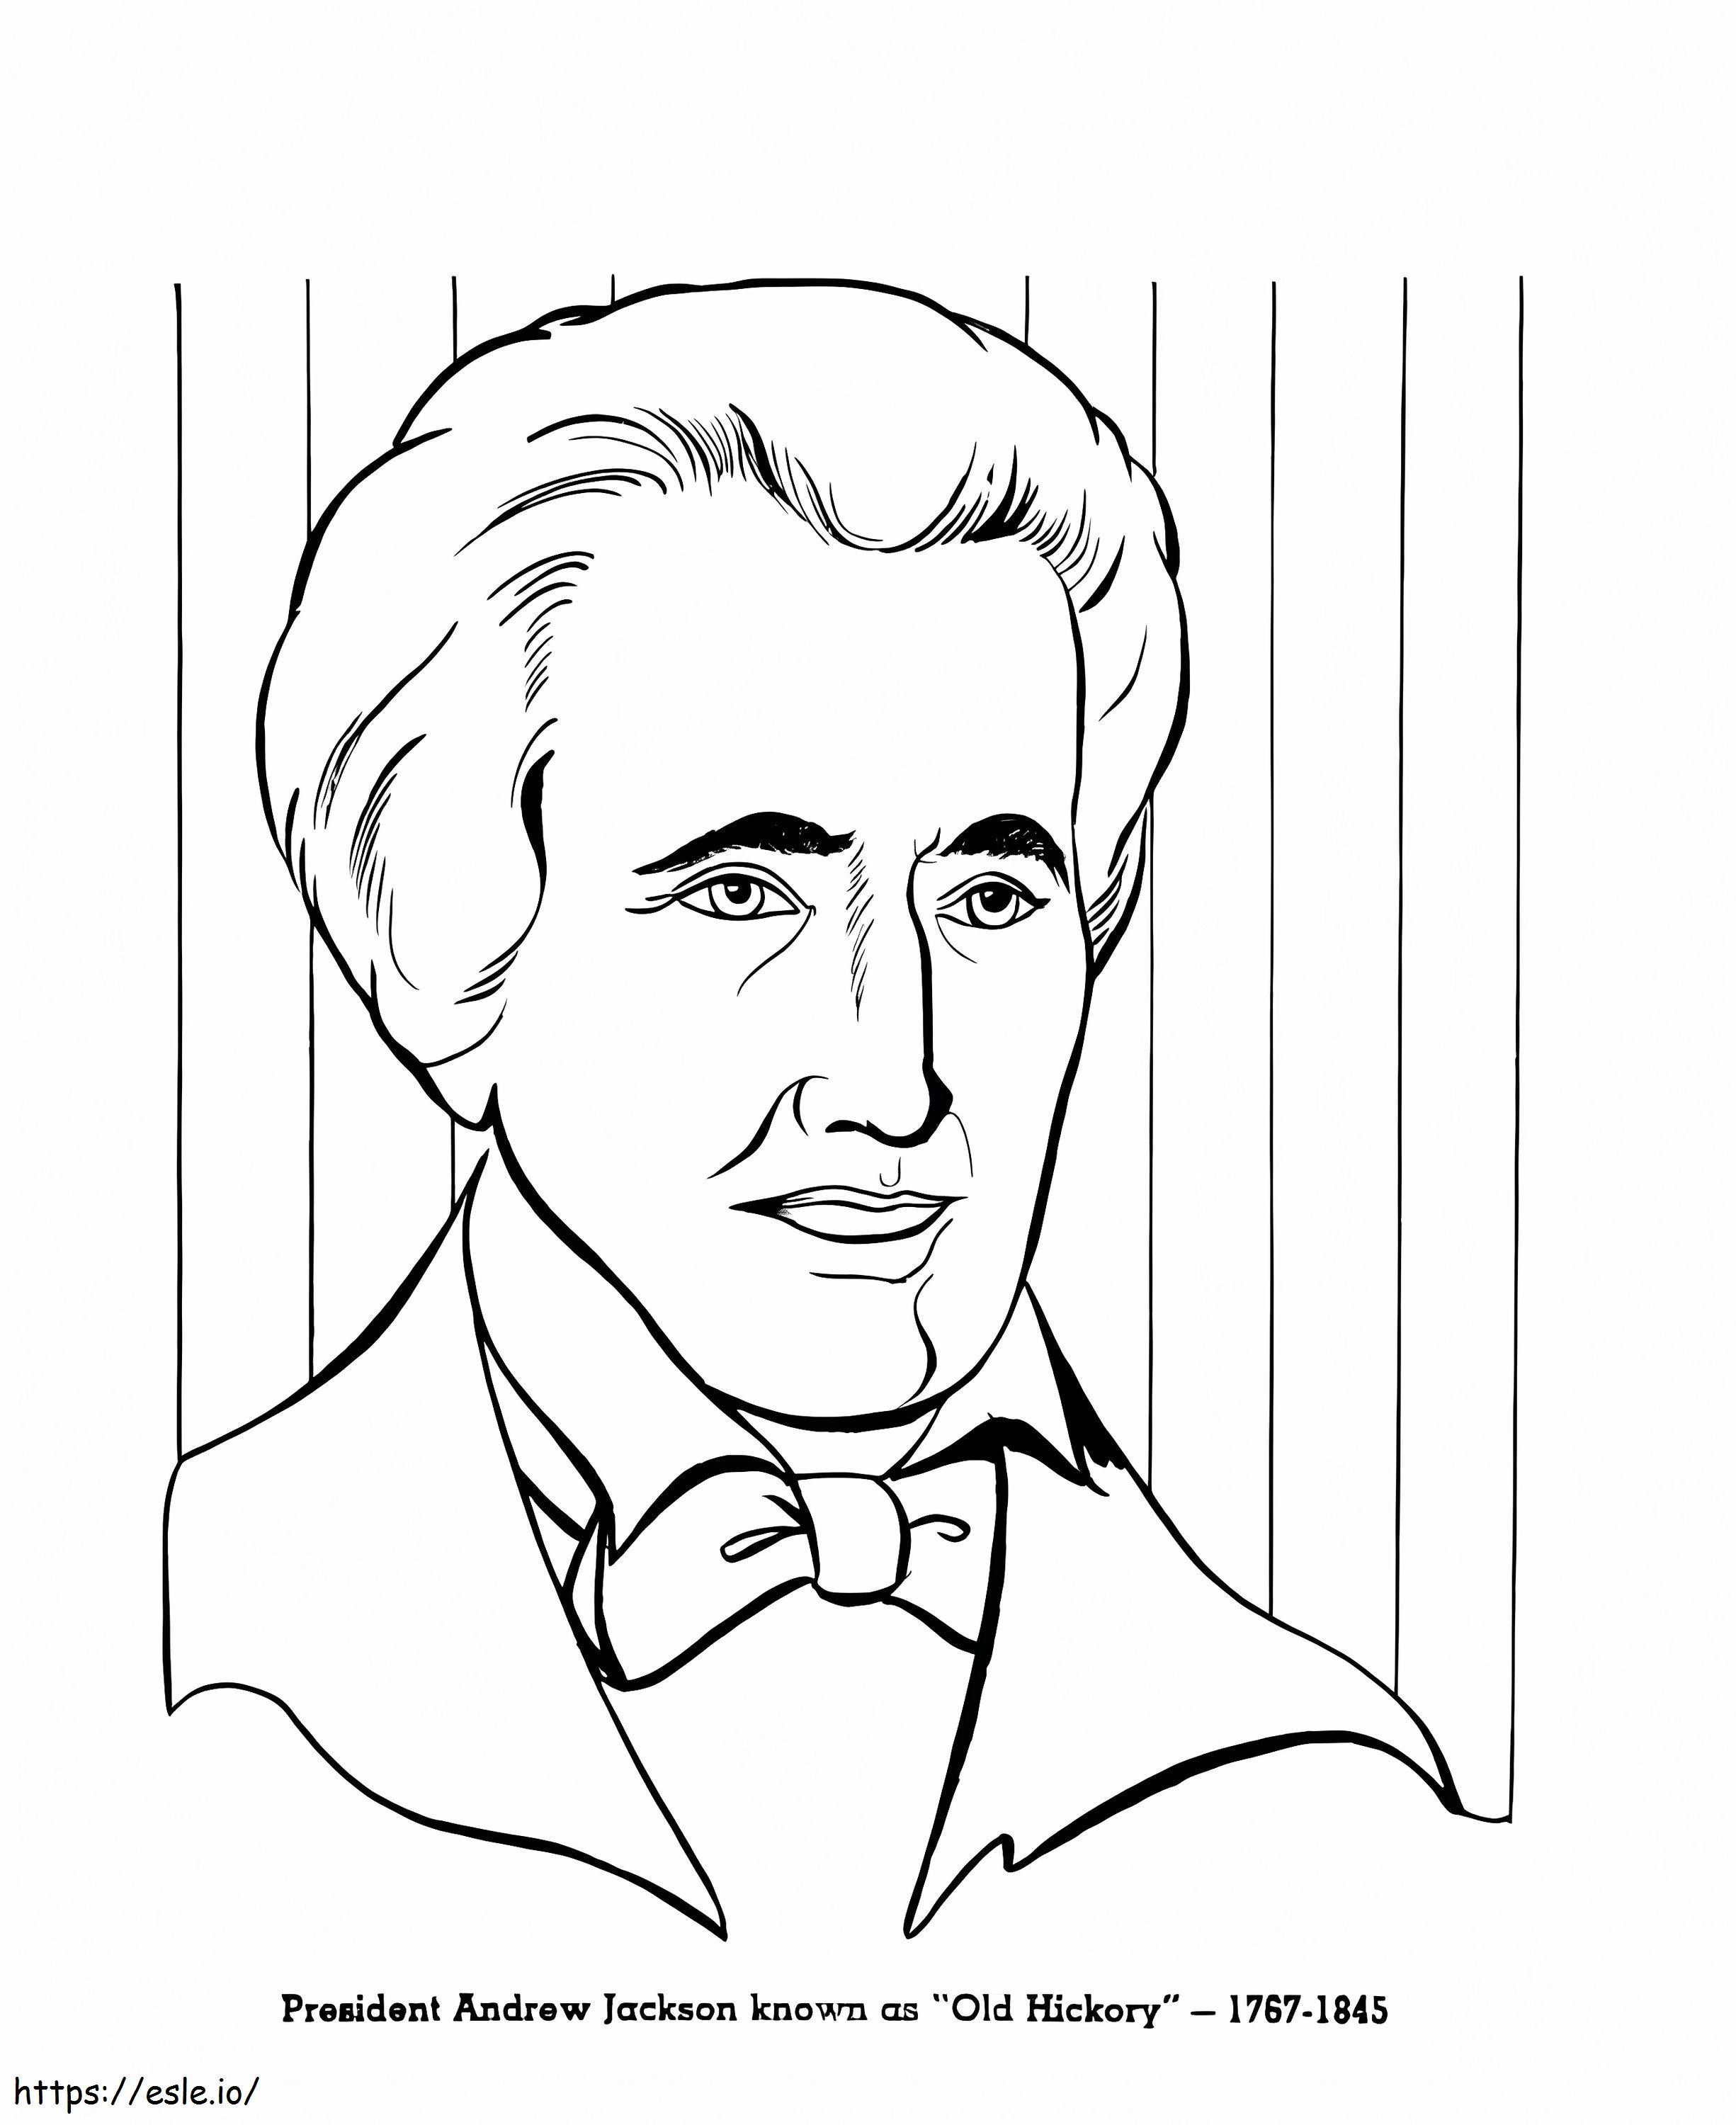 Andrew Jackson 3 coloring page